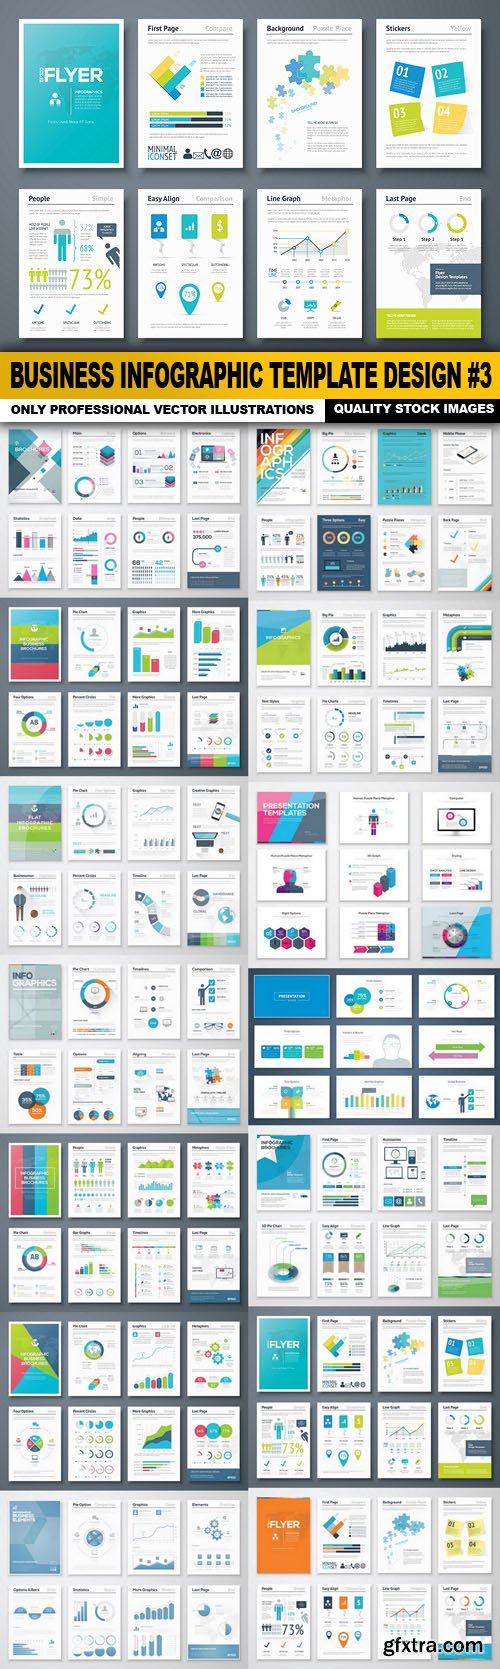 Business Infographic Template Design #3 - 14 Vector